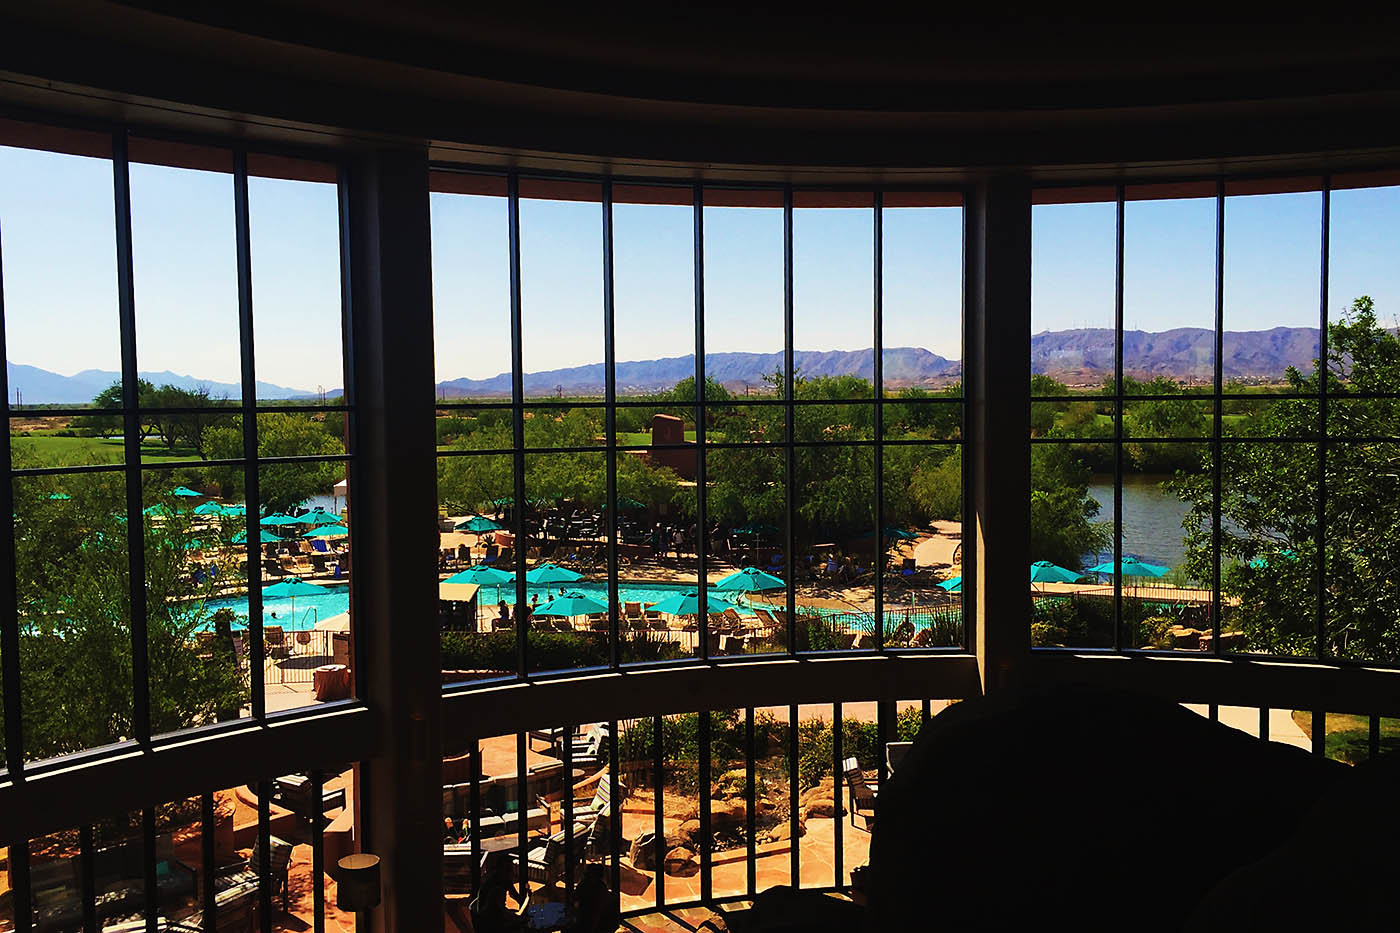 Sheraton Grand at Wild Horse Pass is a great choice for a Phoenix summer staycation